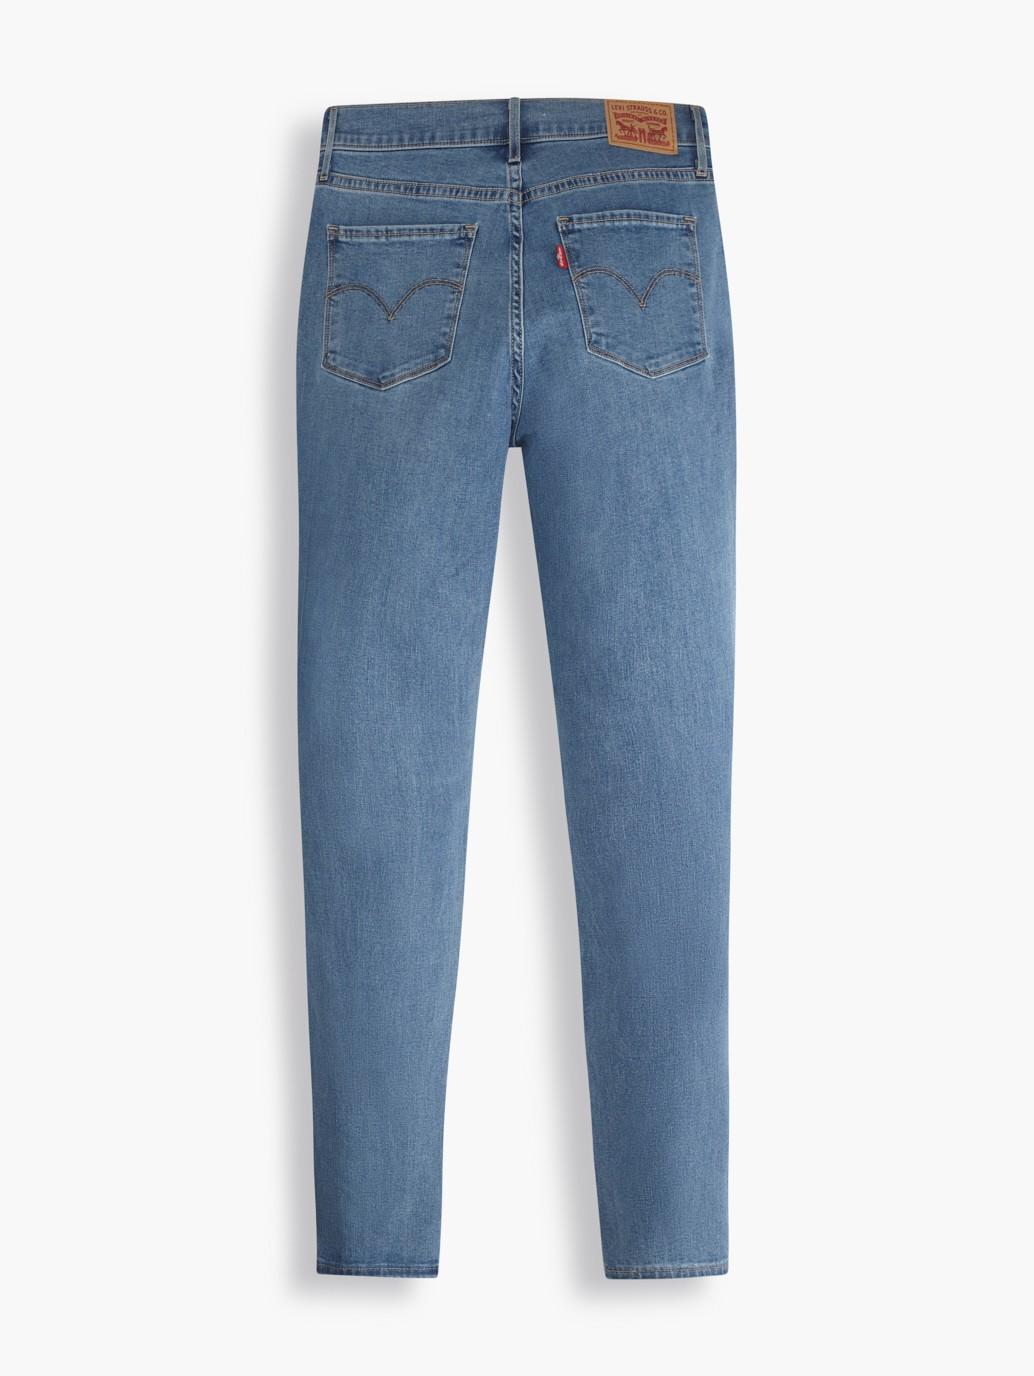 Buy Levi's® Women's 311 Shaping Skinny Jeans | Levi’s® Official Online ...